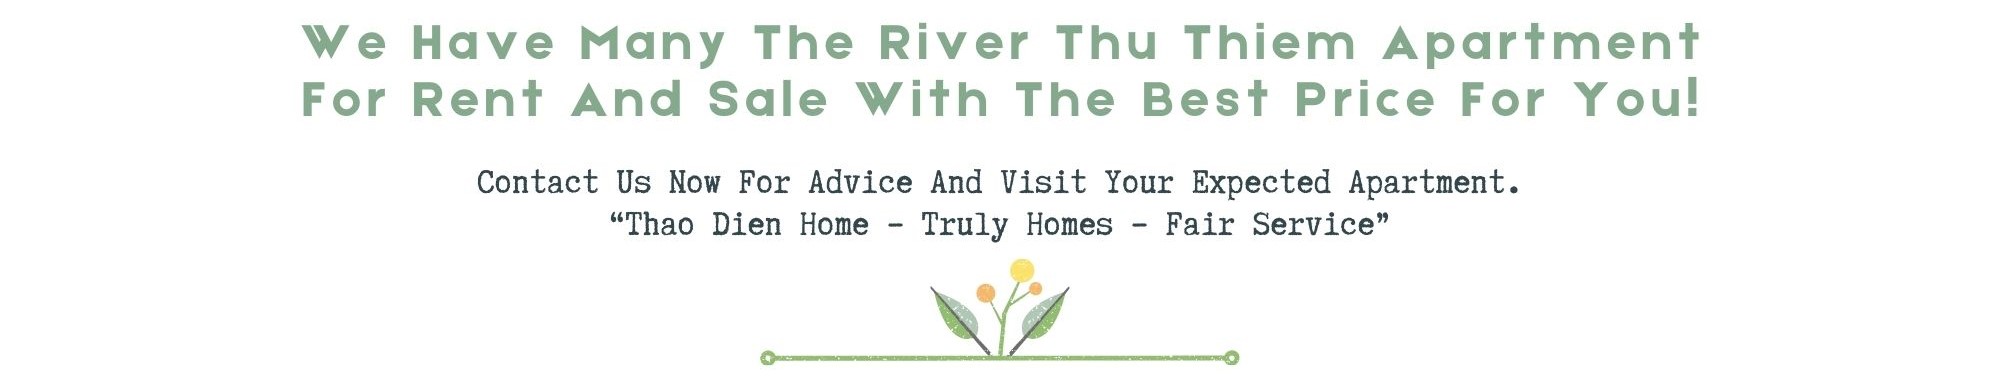 We Have Many The River Thu Thiem Apartment For Rent And Sale With The Best Price For You Contact Us Now For Advice And Visit Your Expected Apartment. Thao Dien Home – Truly Homes – Fair Service - Landmark 81 & Saigon River View! 3-Bedroom in The River Thu Thiem Fully Furnished - Ready to Move In